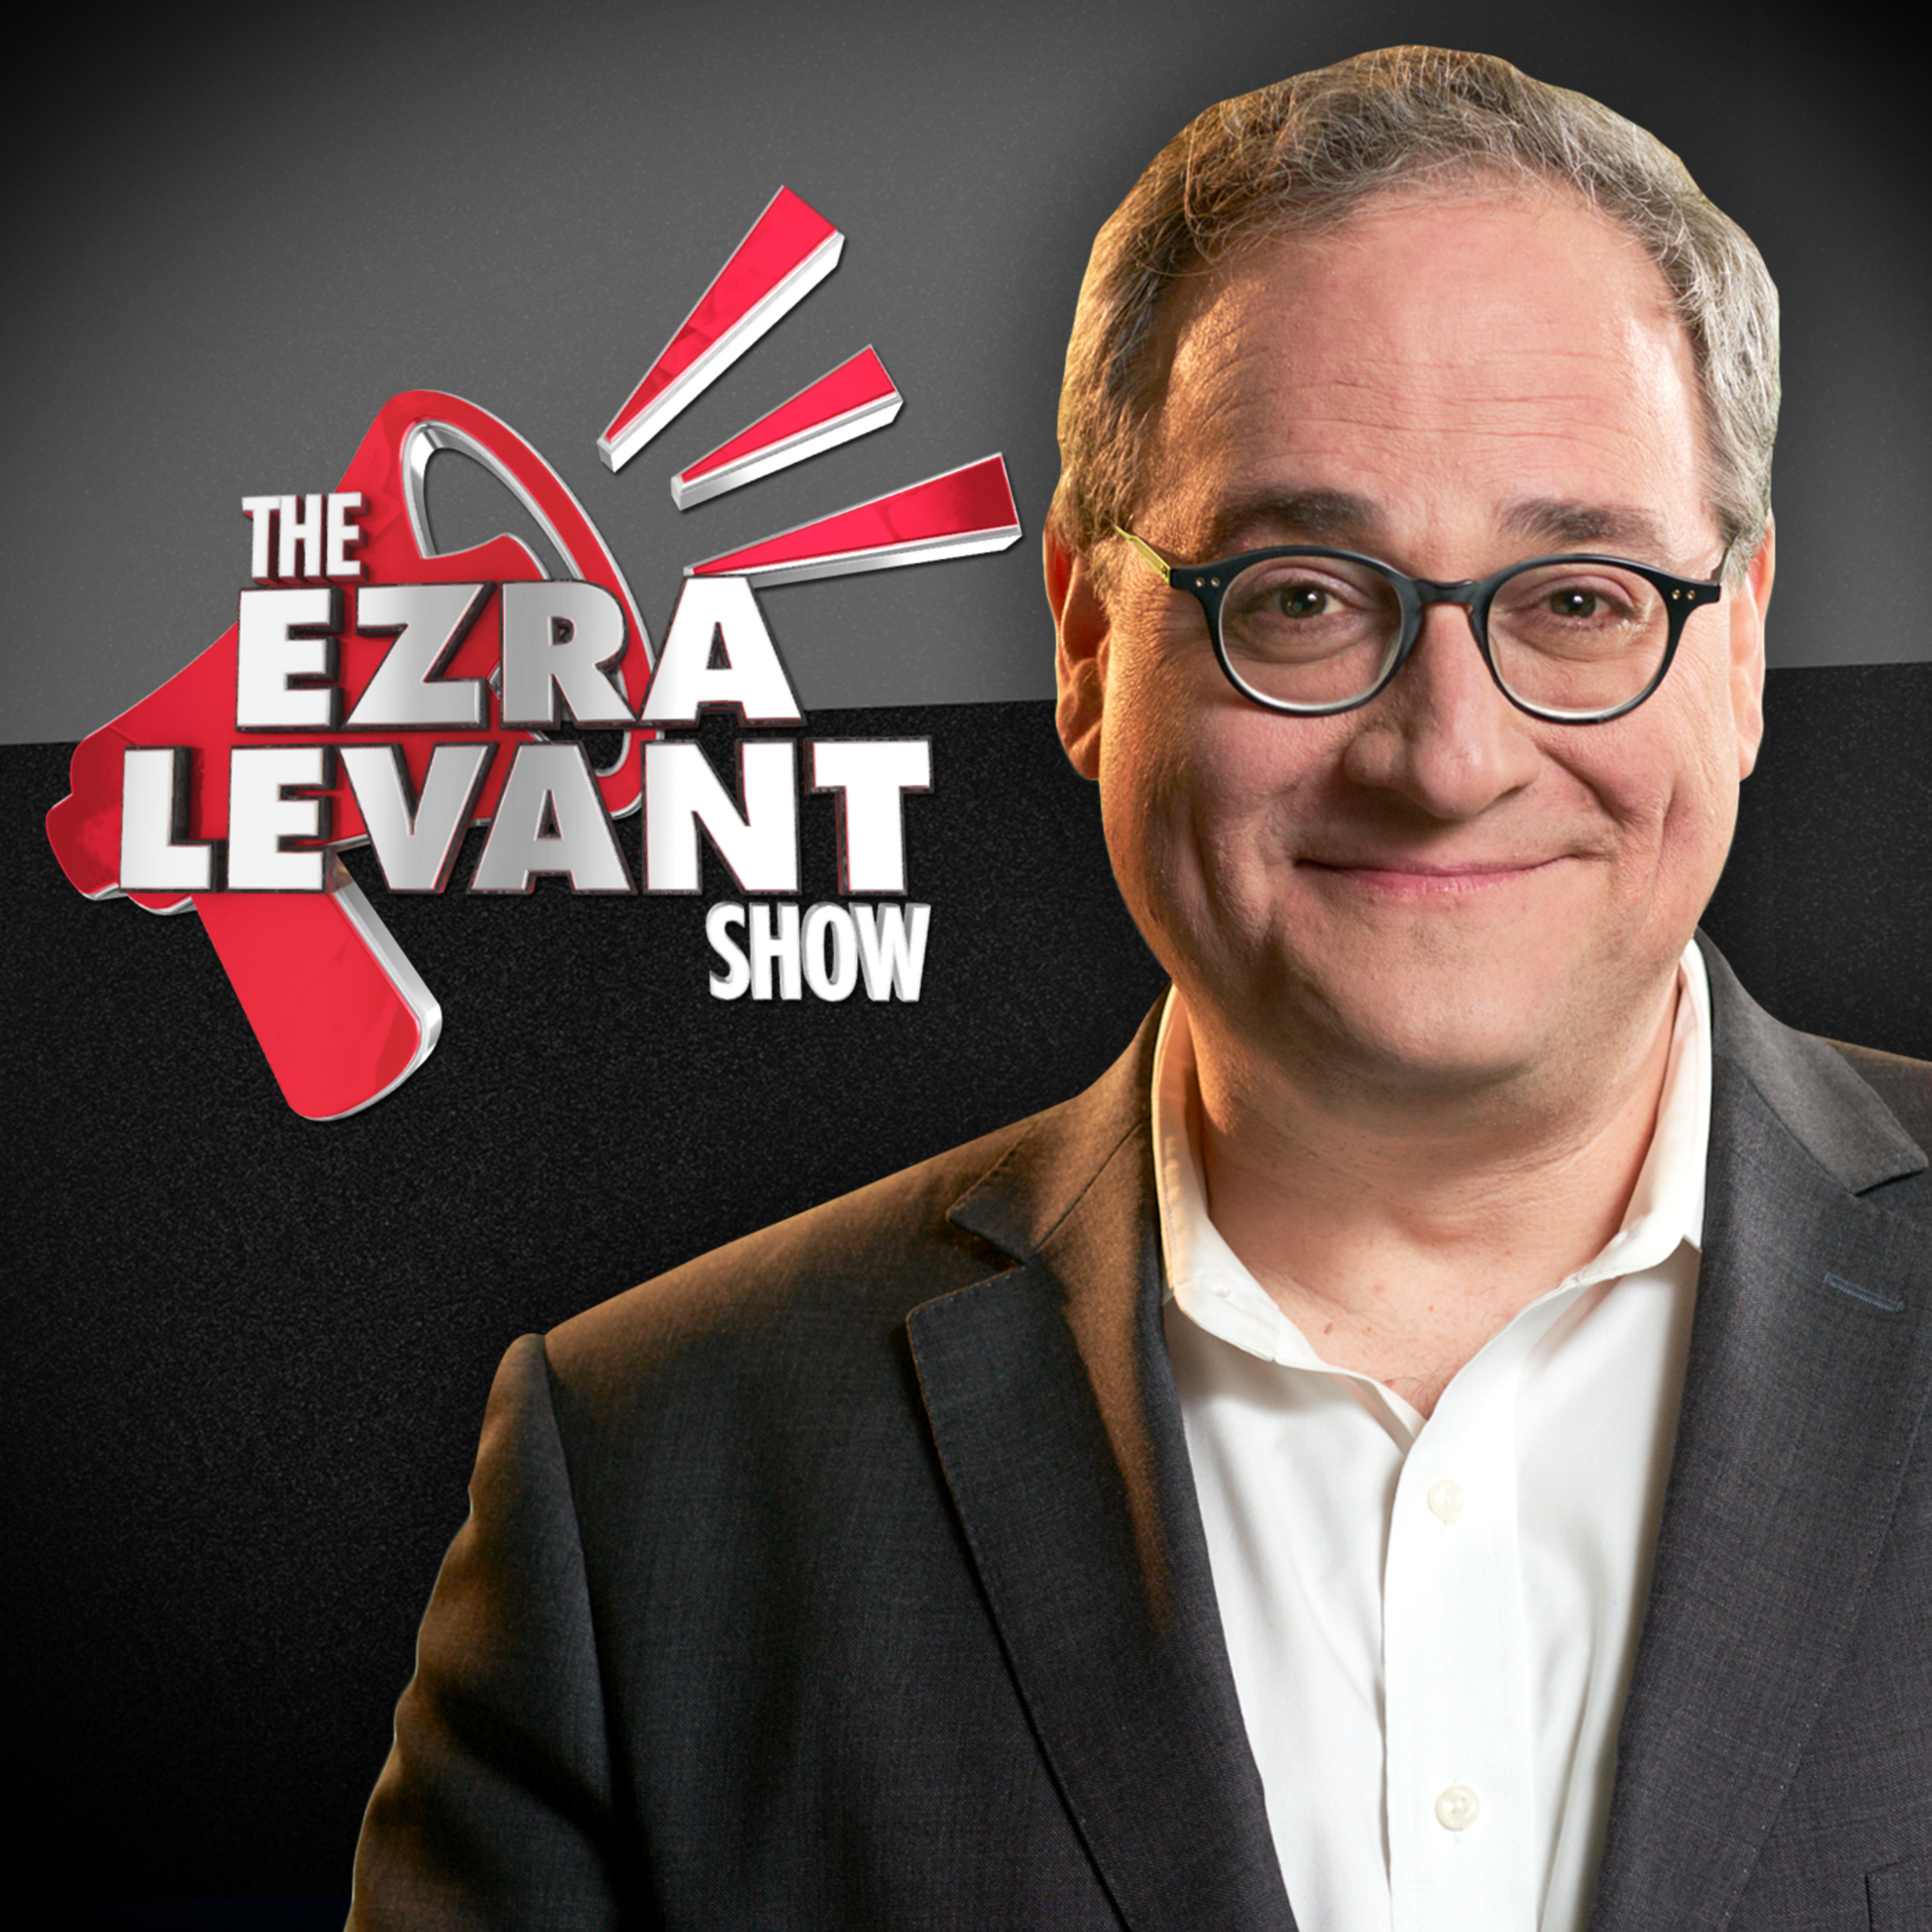 EZRA LEVANT: The 'Trucker Commission' is underway with some surprising revelations